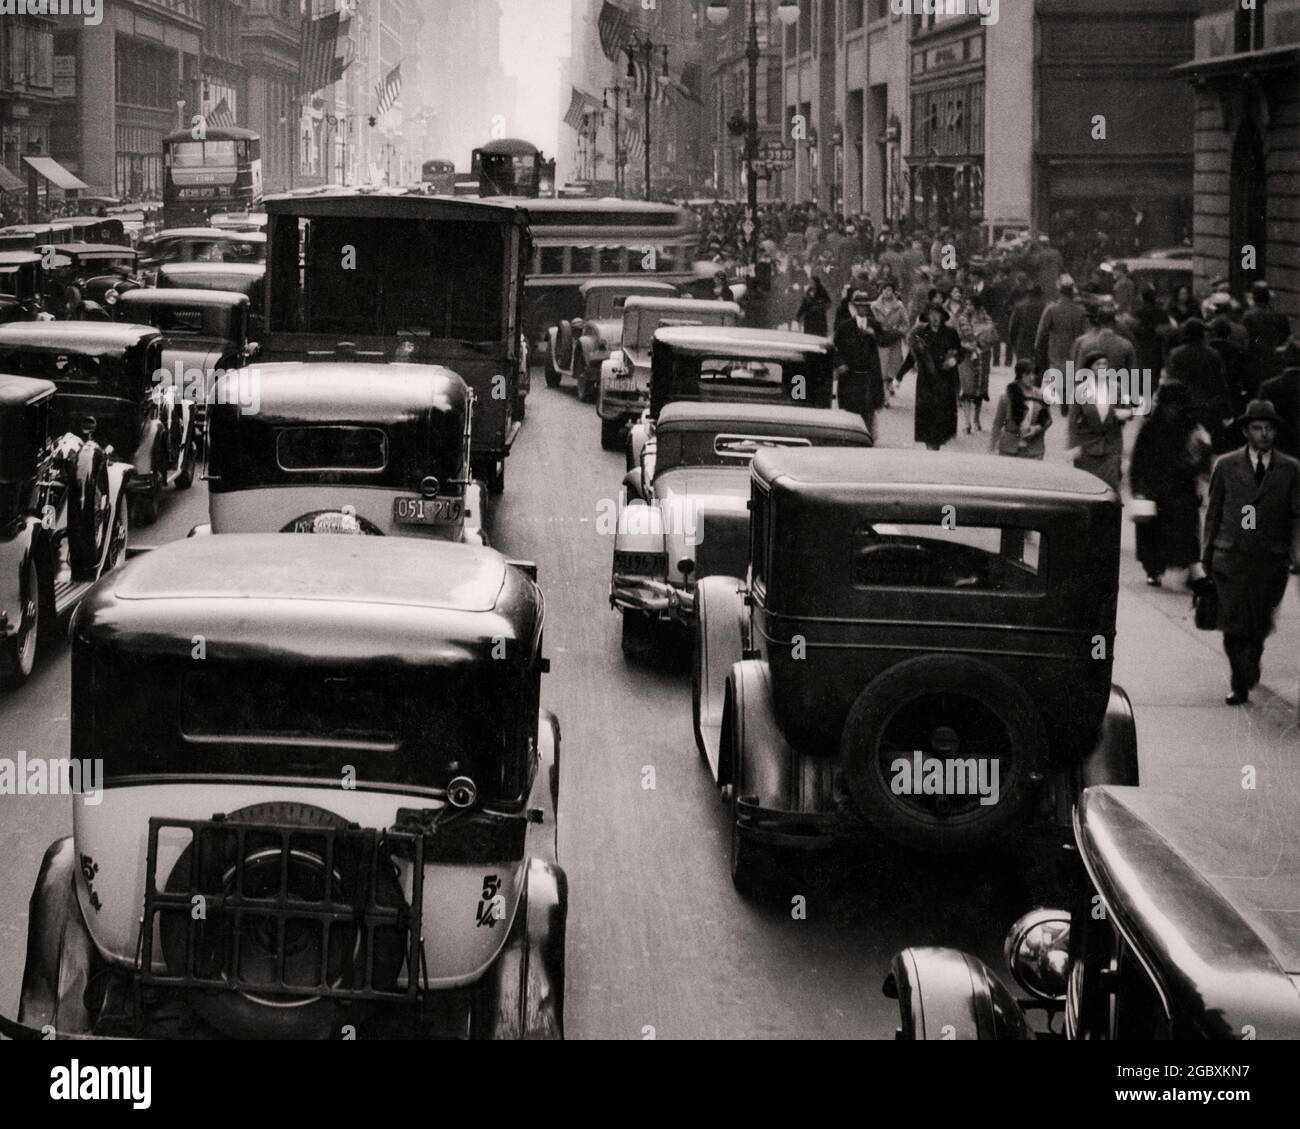 1930s TRAFFIC JAM ON FIFTH AVENUE AT 39th STREET PEDESTRIANS CARS TRUCKS BUSES TAXIS MIDTOWN MANHATTAN NYC USA - q74973 CPC001 HARS PROGRESS AT ON NYC CONCEPTUAL NEW YORK AUTOMOBILES CITIES DELAY ESCAPE VEHICLES NEW YORK CITY BUSES CONGESTION TAXIS BLACK AND WHITE FIFTH AVENUE OLD FASHIONED Stock Photo